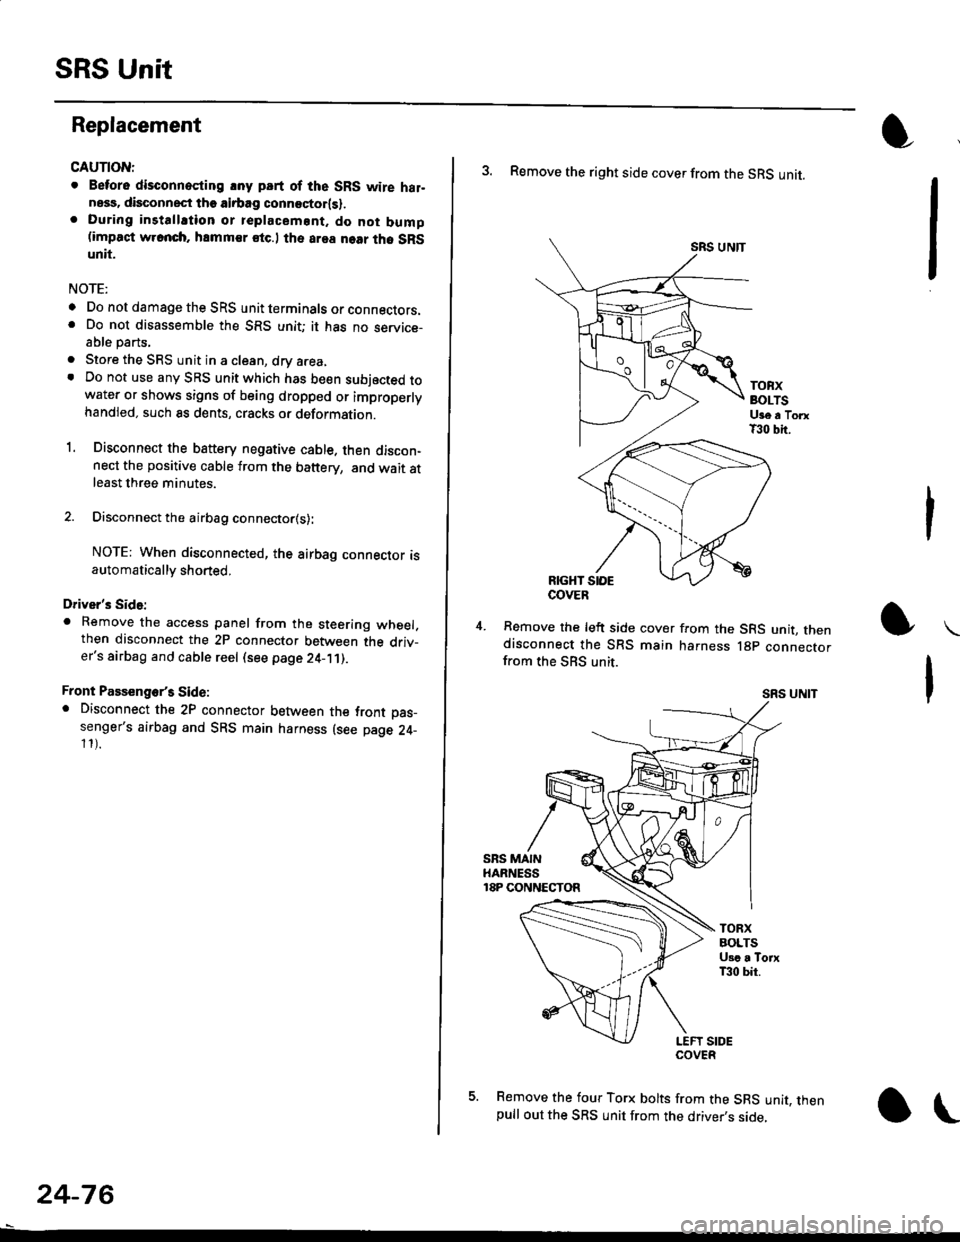 HONDA CIVIC 1996 6.G Manual PDF SRS Unit
Replacement
CAUTION:
. Betore disconnoqting lny pErt of the SRS wire hal-ness, disconnect th9 airbag conn"ctorlsl.. During installltion or teplacemsnt. do not bump(impact w.cnch, hamm€r stc